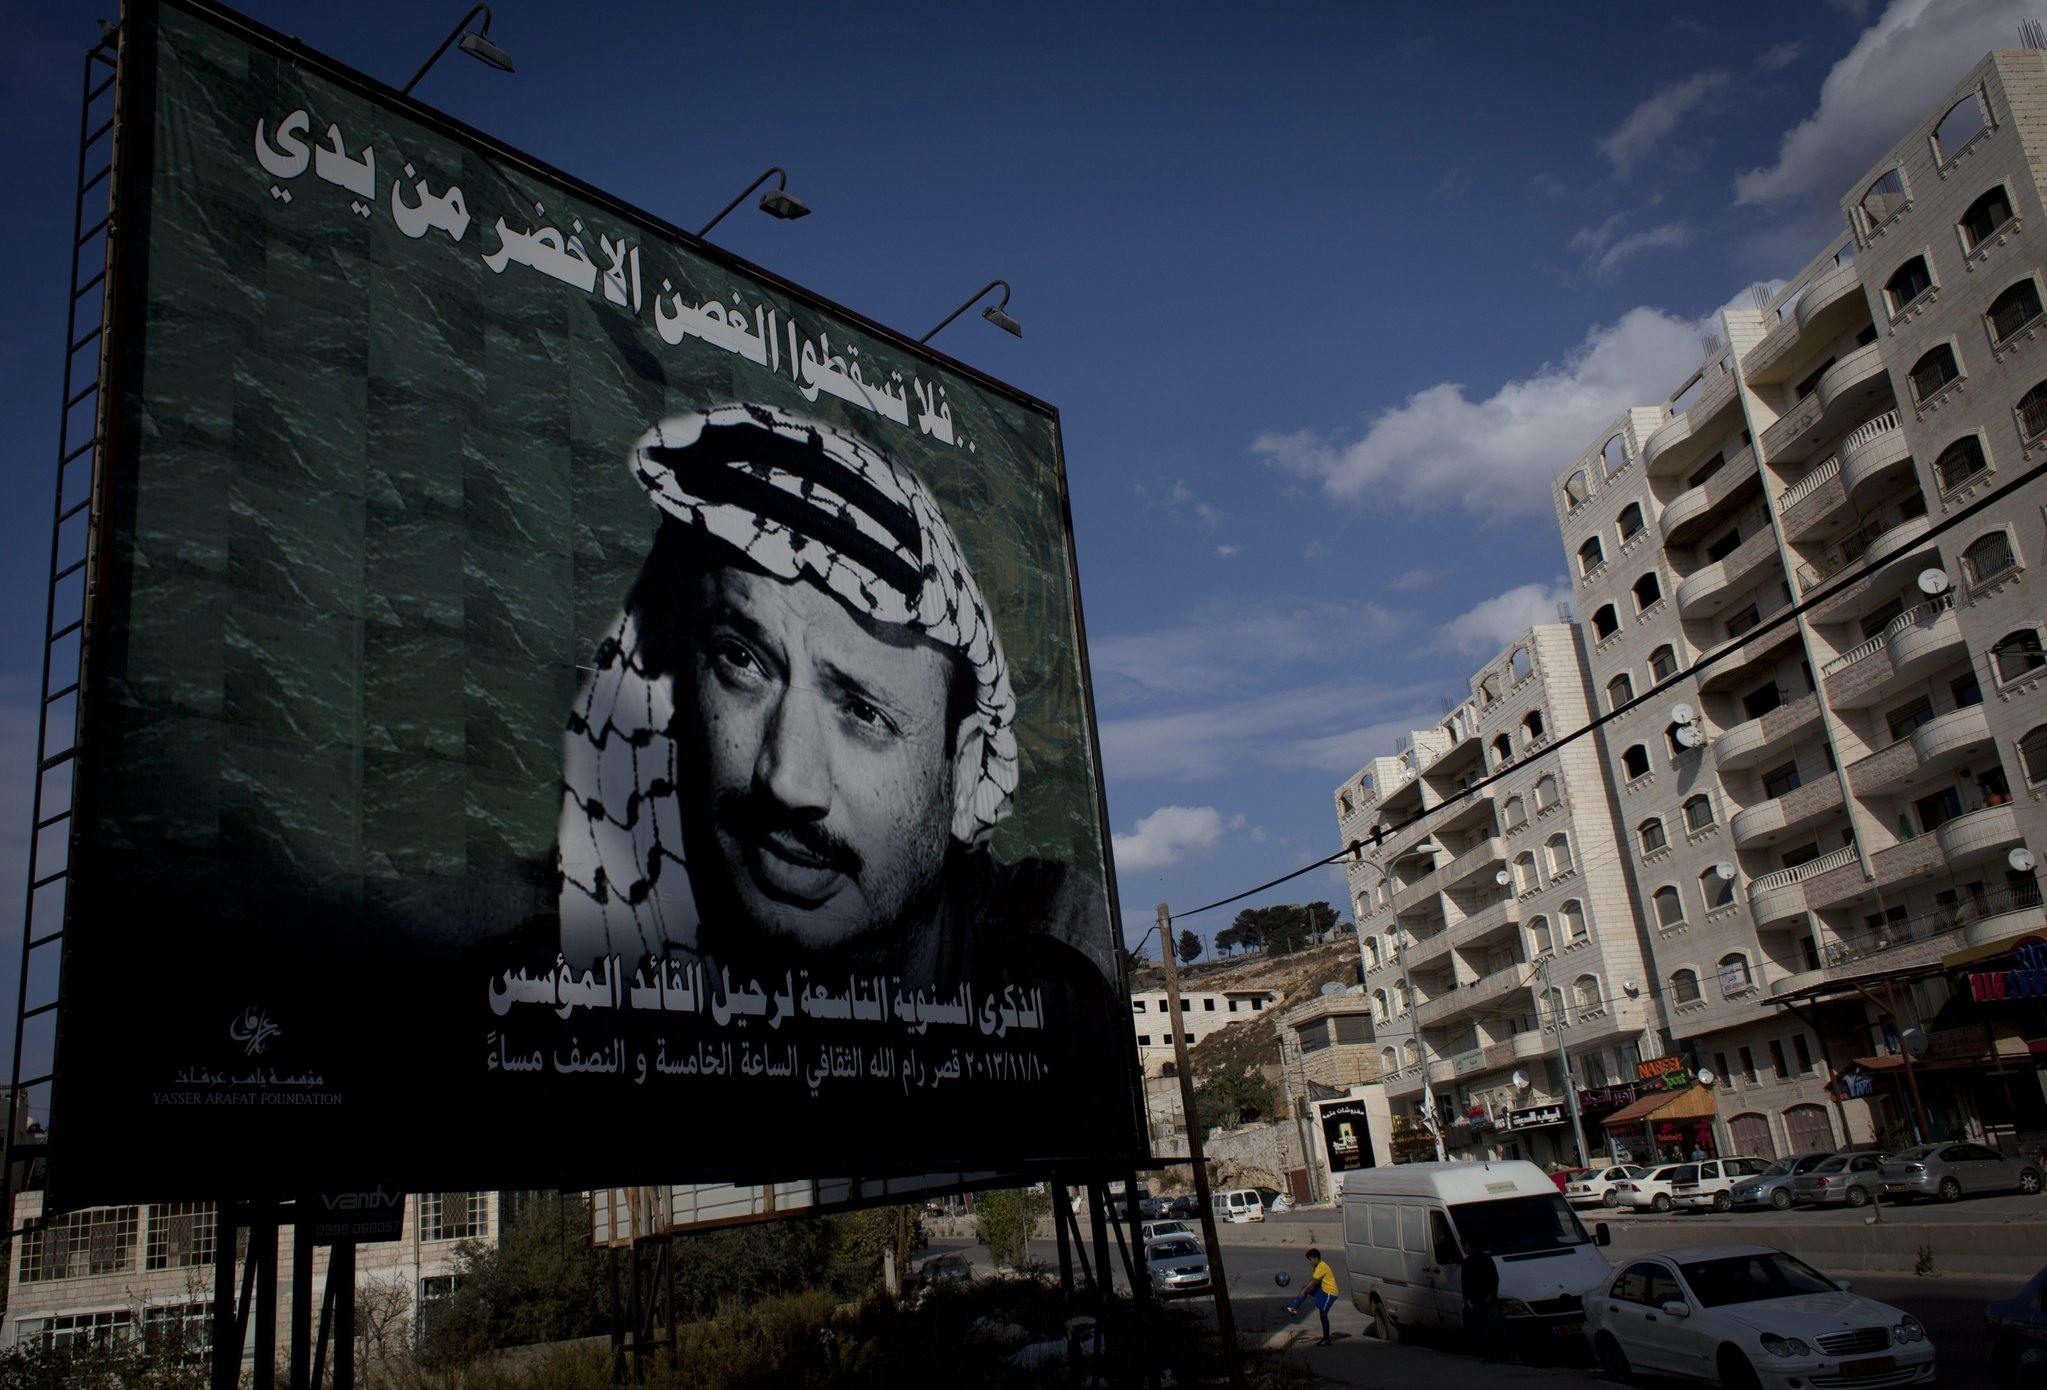 A youth plays soccer by a big poster of late Palestinian leader Yasser Arafat in the West Bank city of Ramallah, Friday, Nov. 8, 2013. (AP Photo)